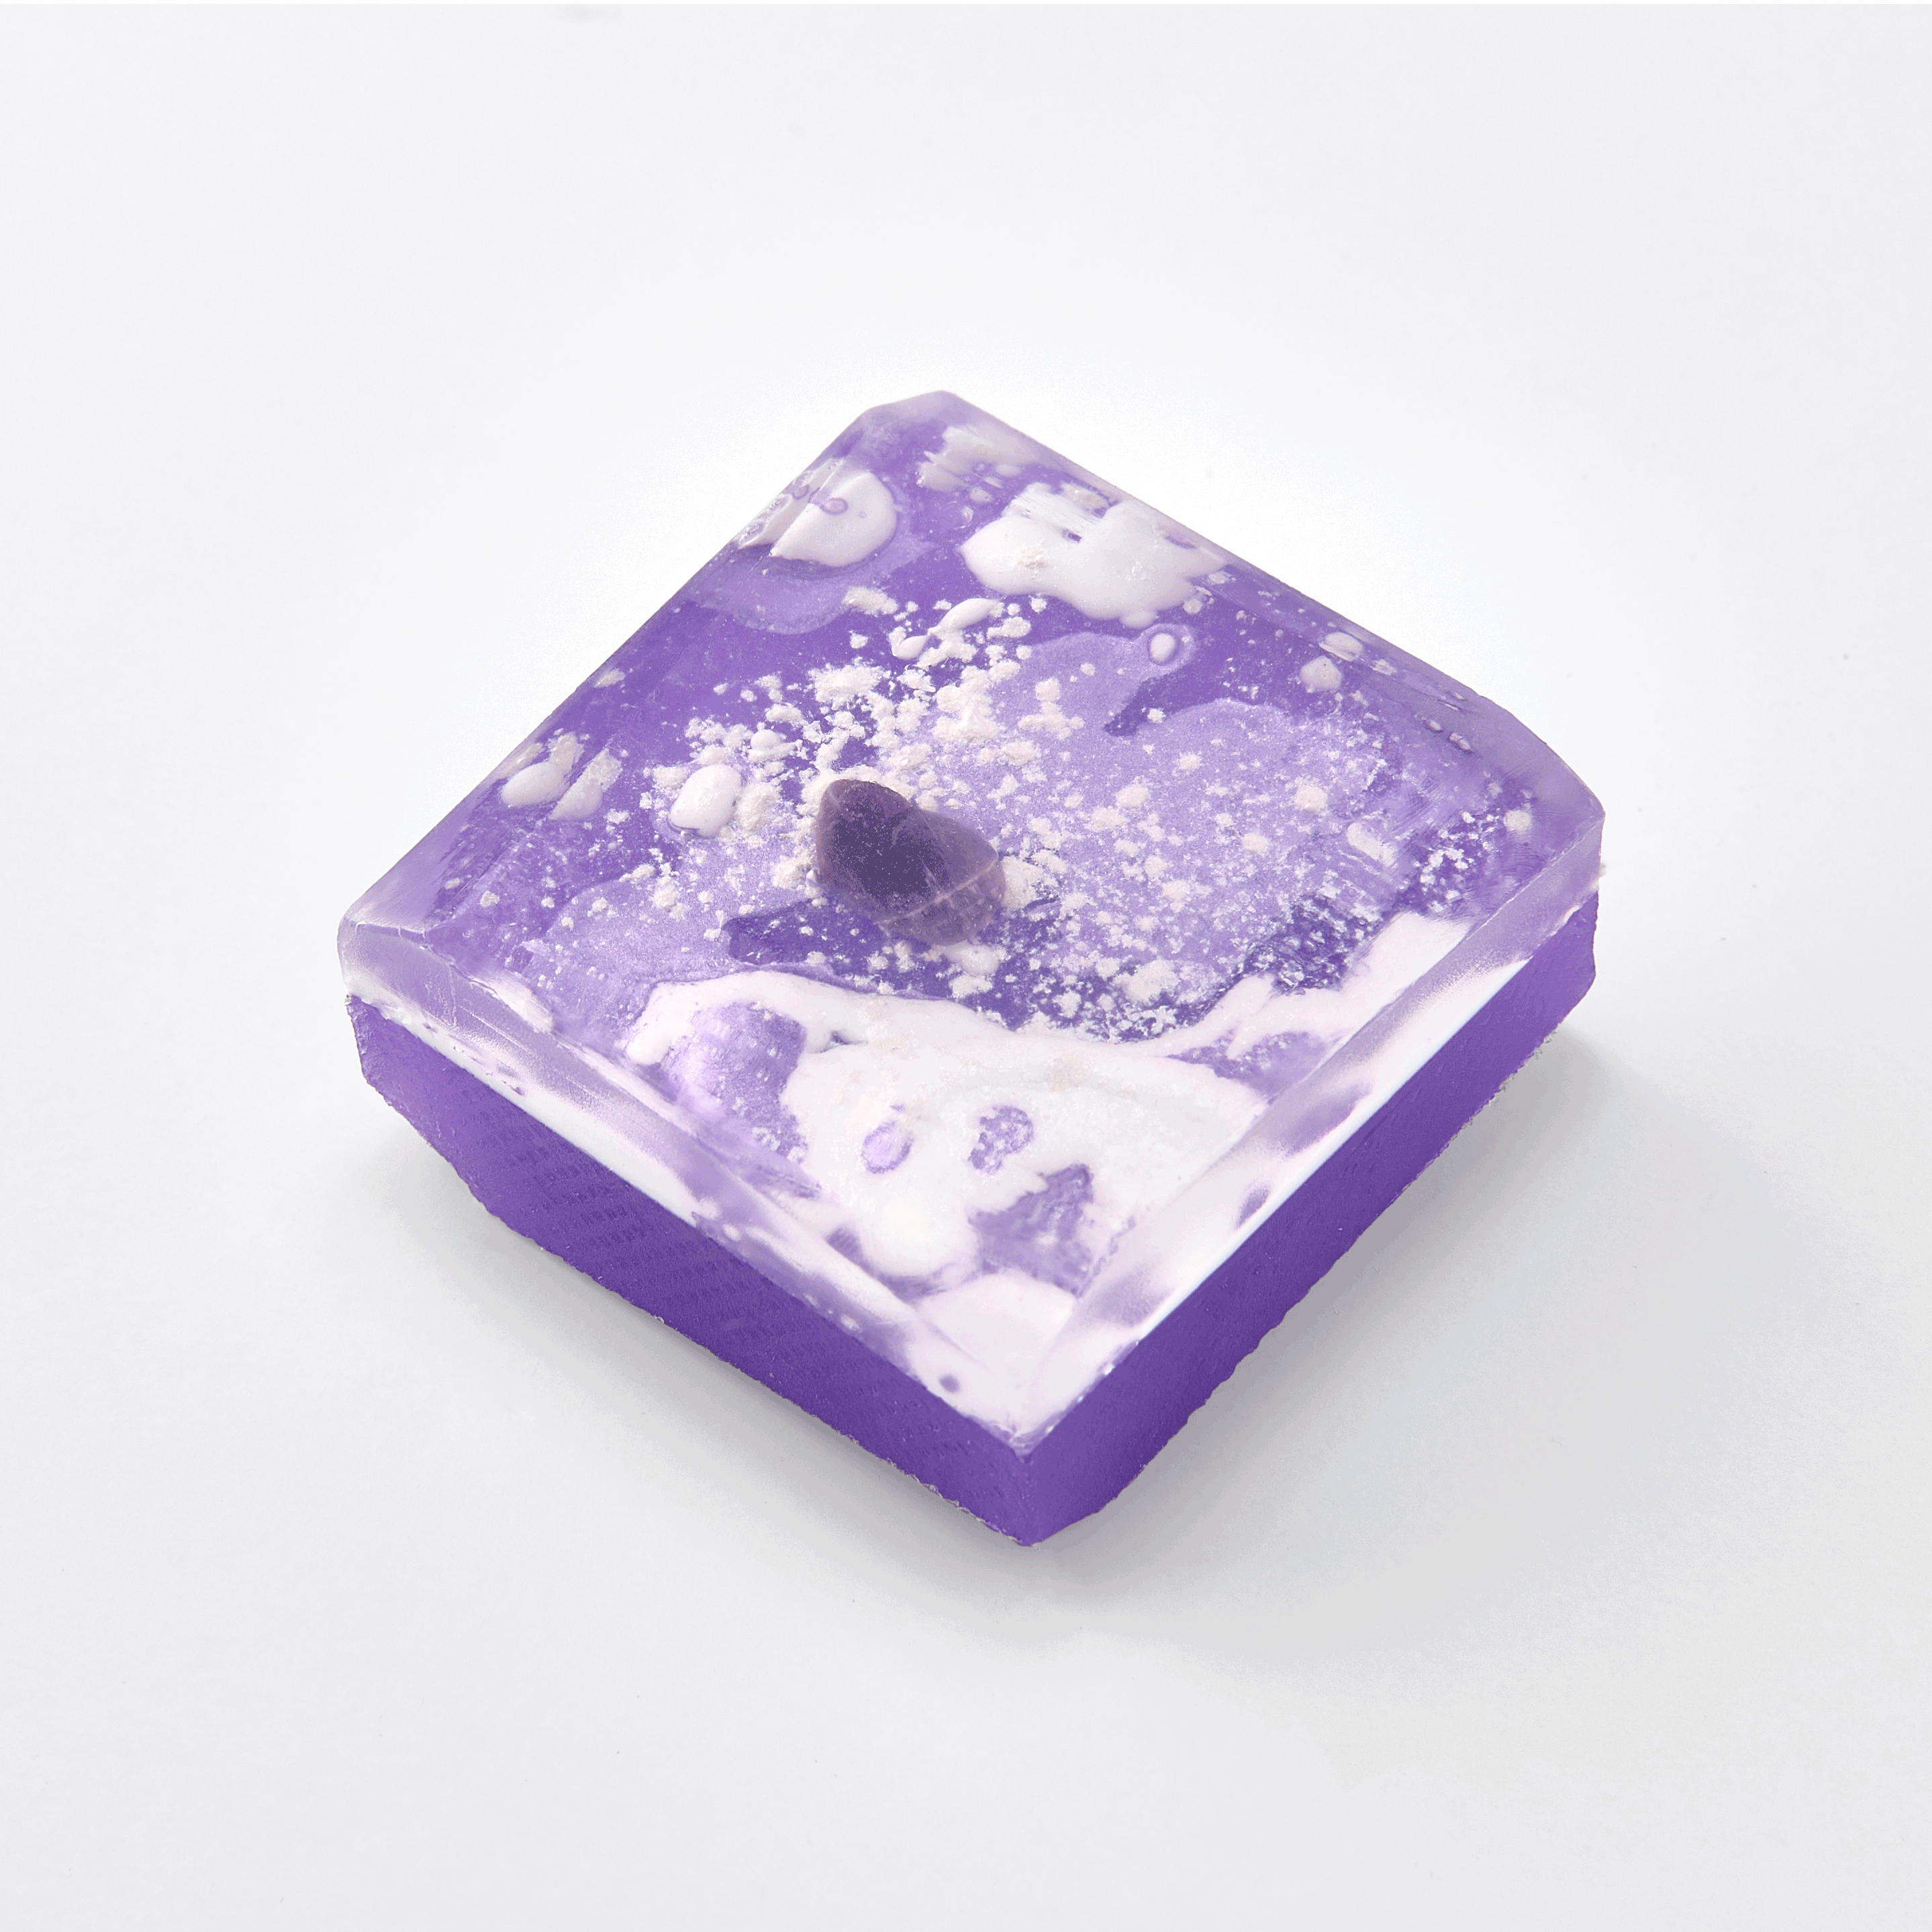 PURPLE: TRANSCENDENCE -CHAKRA CLEANSE COLLECTION - HEALING STONE FRAGRANCE SOAP